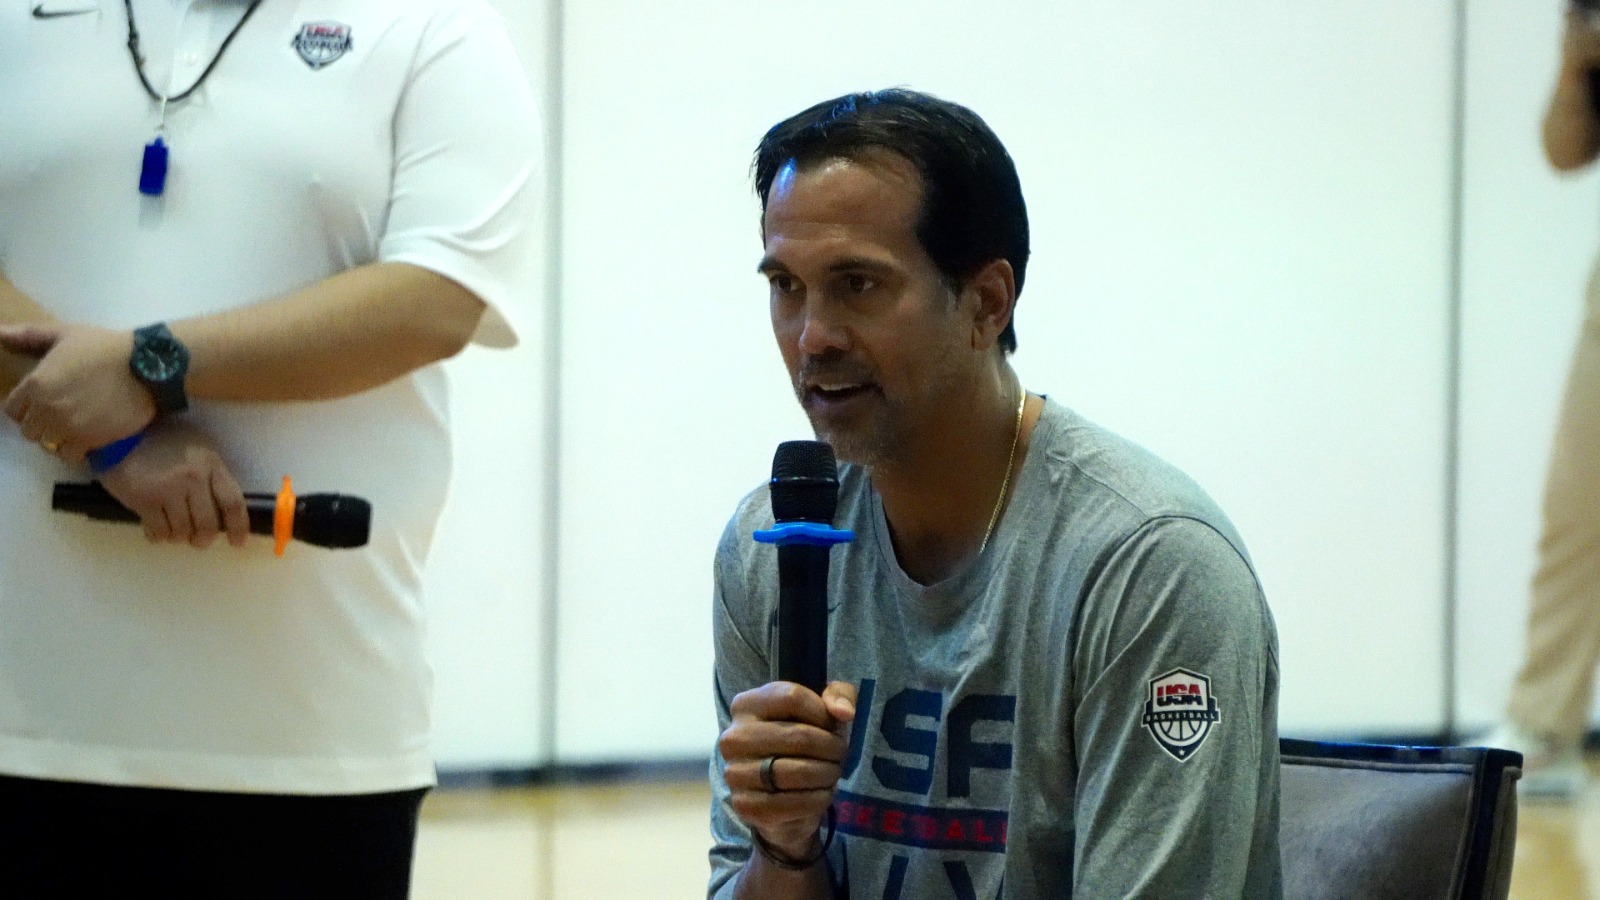 Spoelstra: World Cup a big challenge for young Team USA